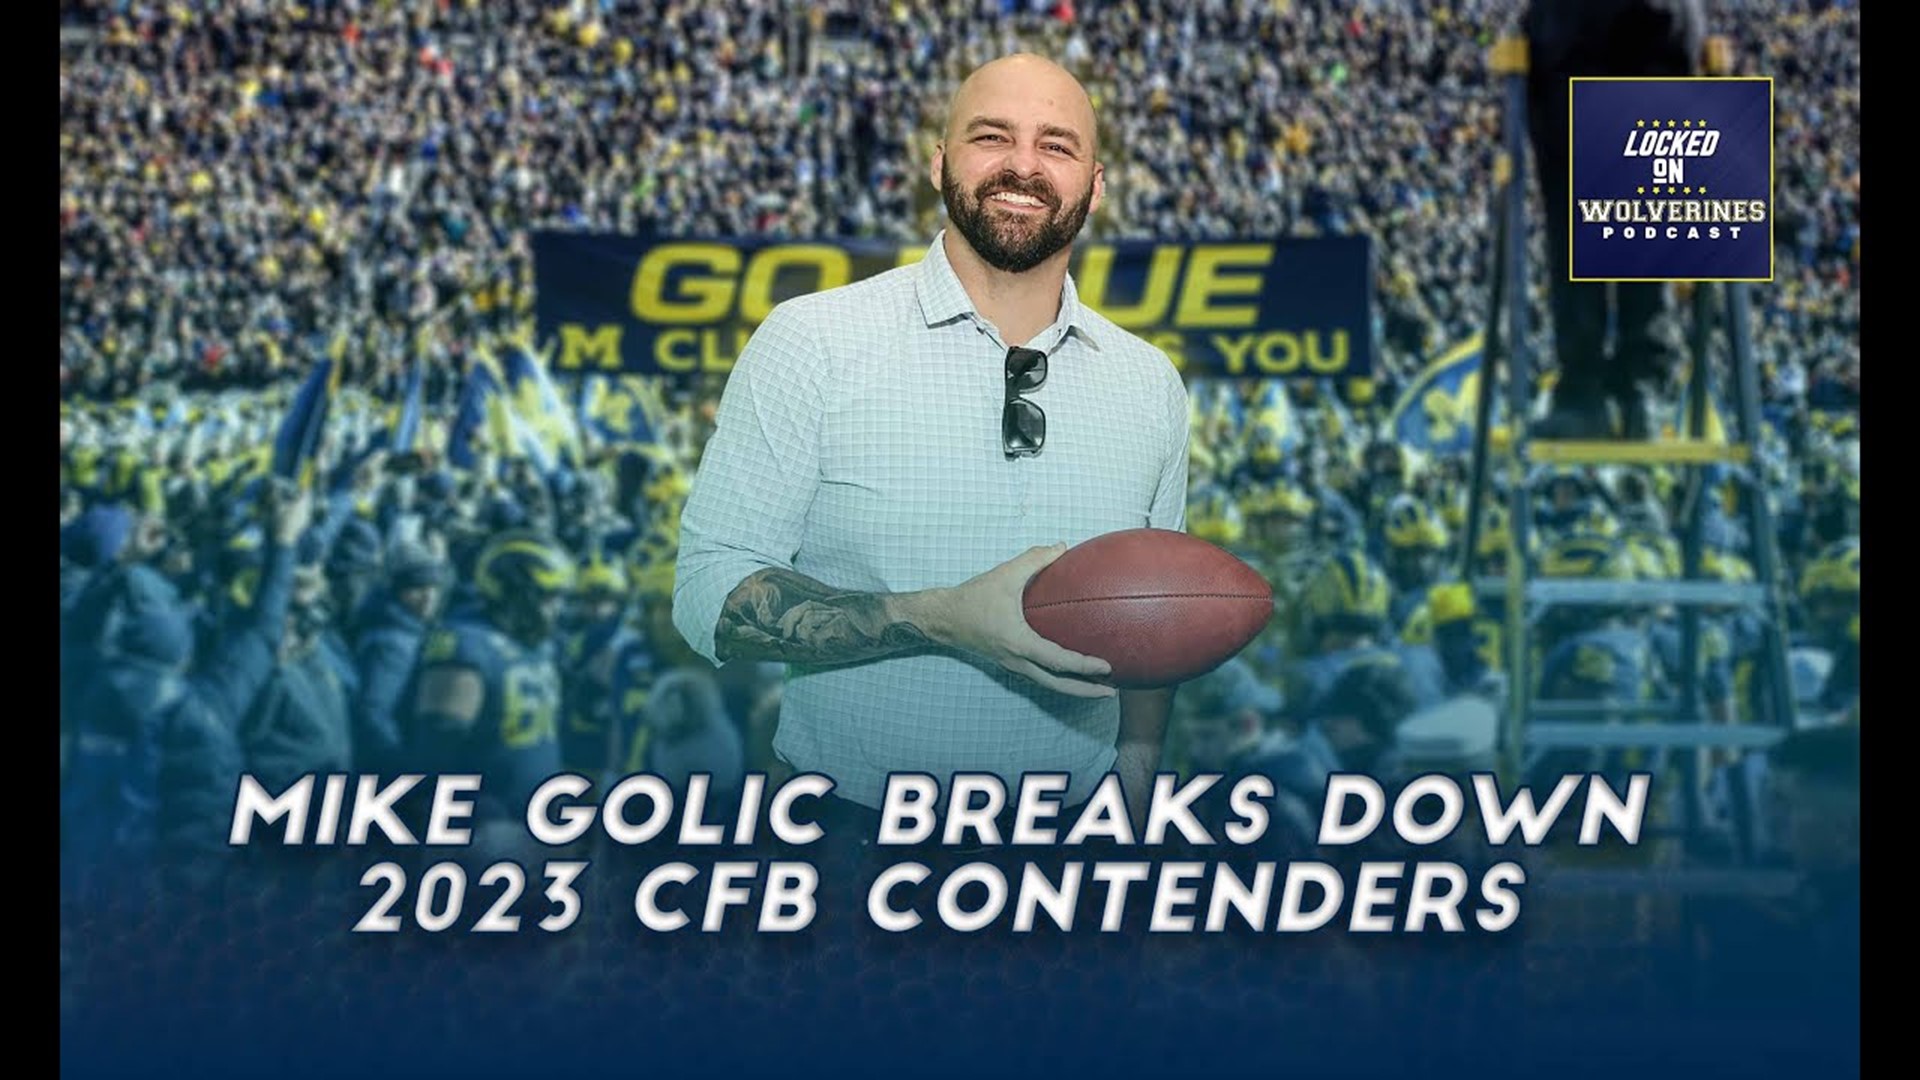 Special guest: Mike Golic Jr. breaks down CFB, Michigan football